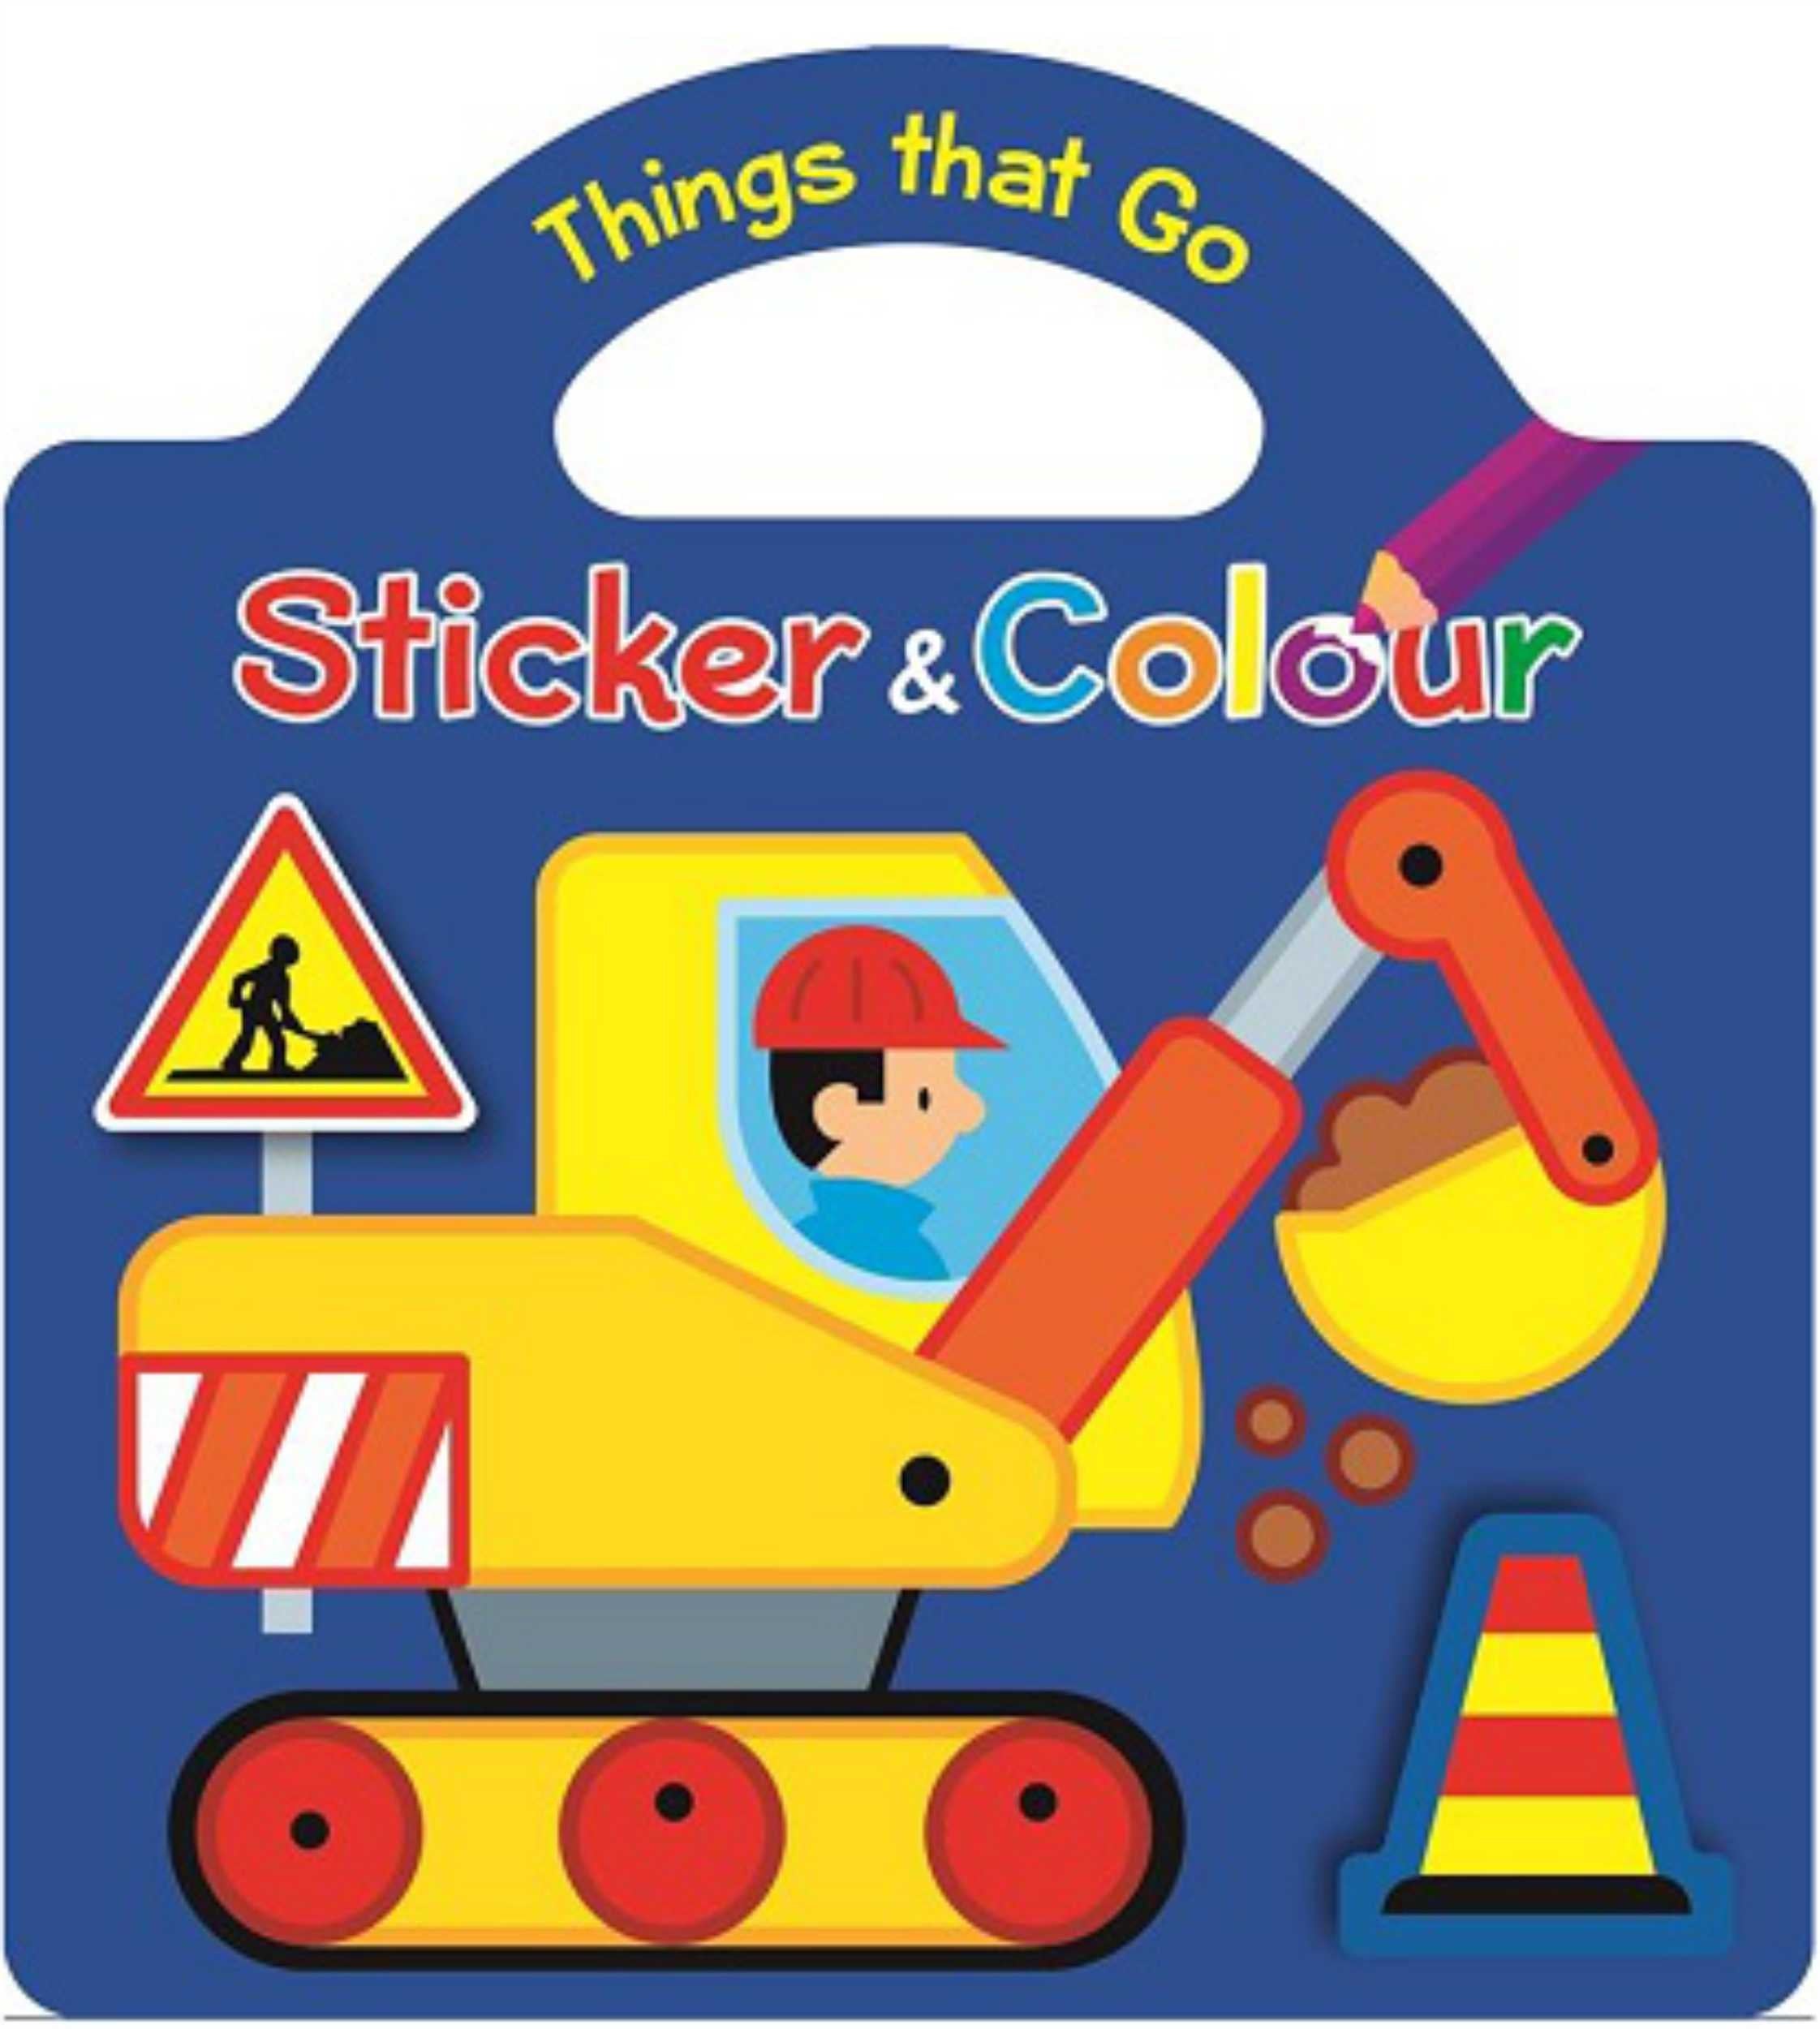 Things That go - Sticker & Colour Book 2